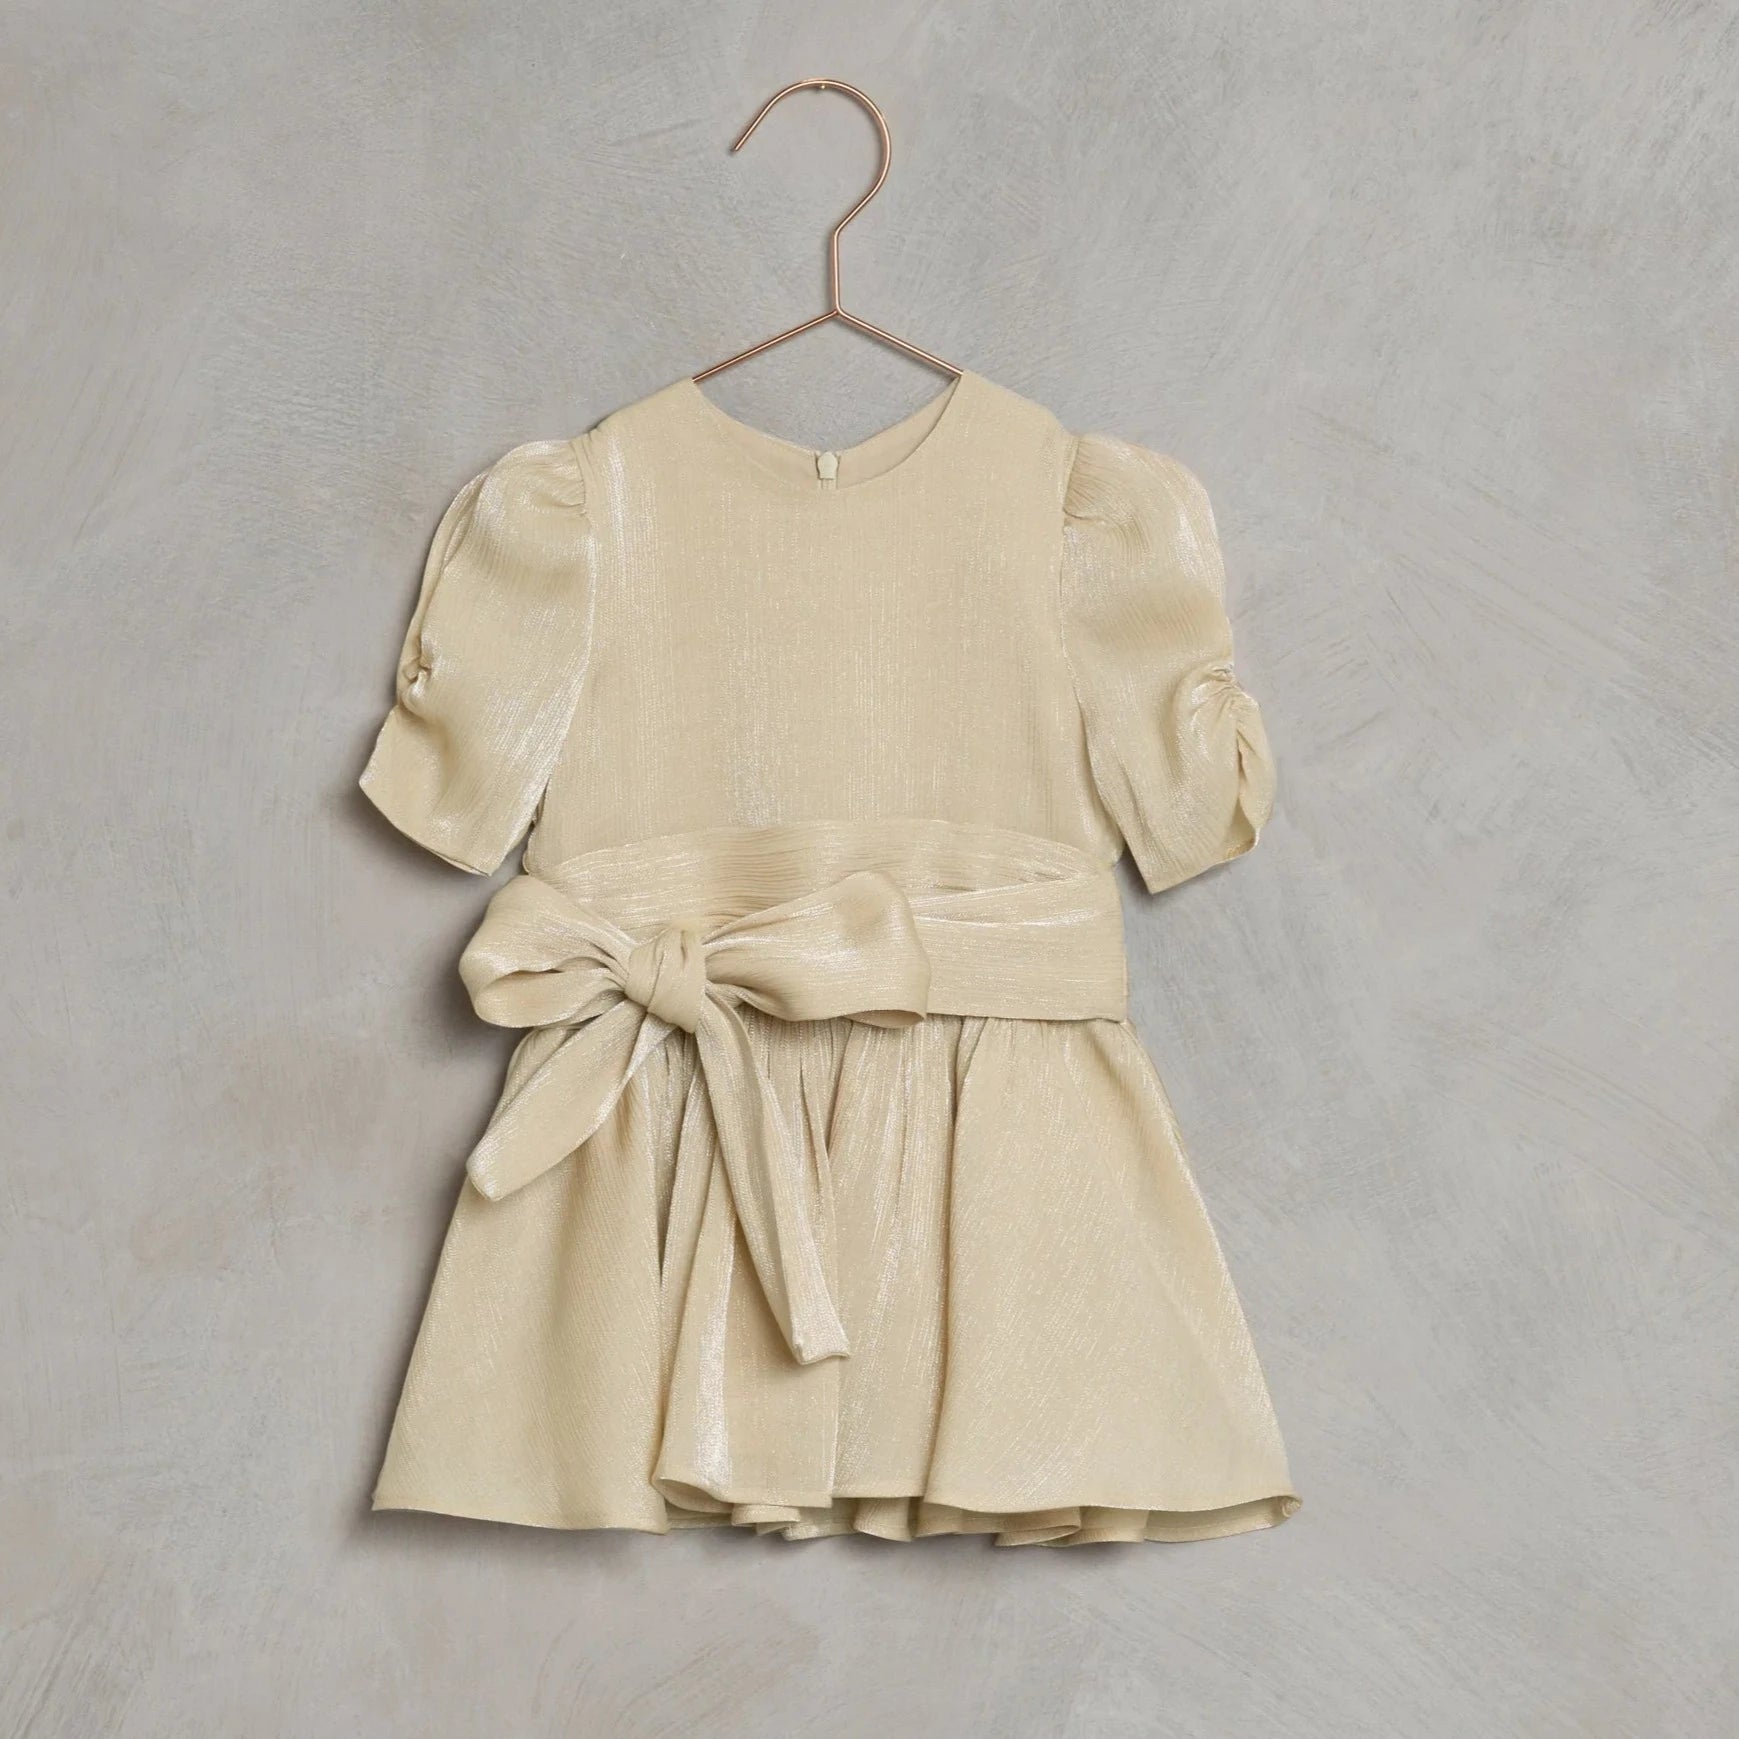 This Noralee ‘Josephine’ dress will make every girl feel special. It’s made from metallic tencel with our ‘metallic champagne’, a soft viscose liner, and has a bow at the waist. 